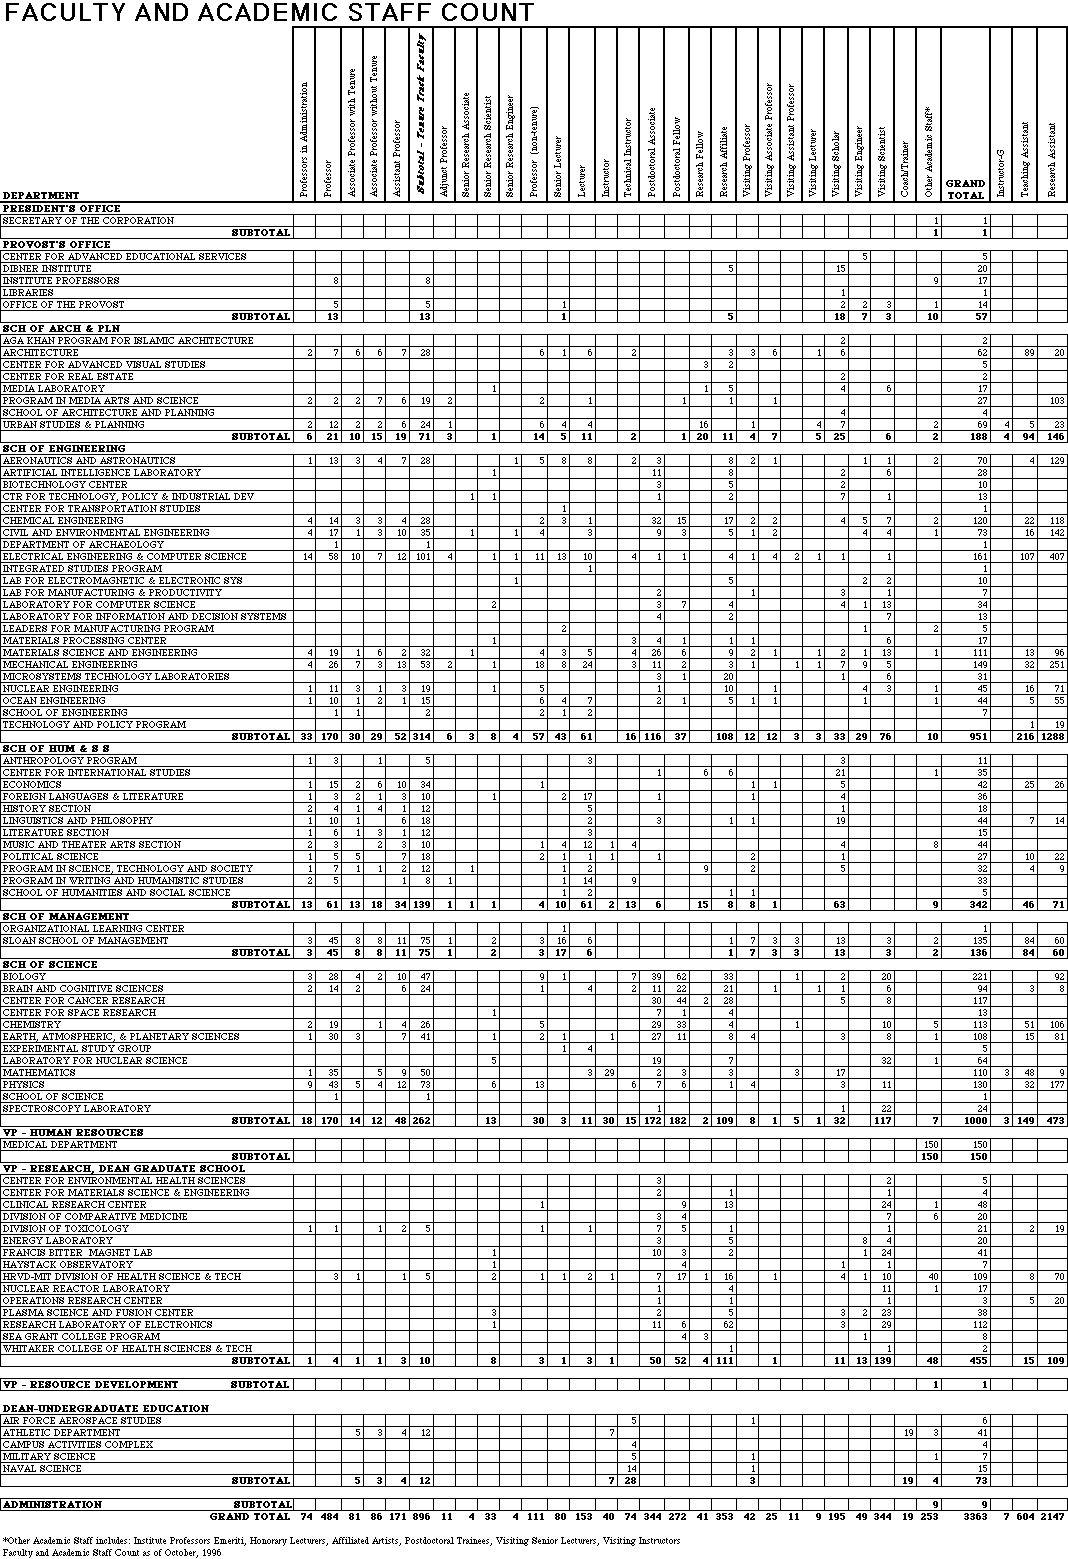 Faculty and Academic Staff Count Chart (large file)